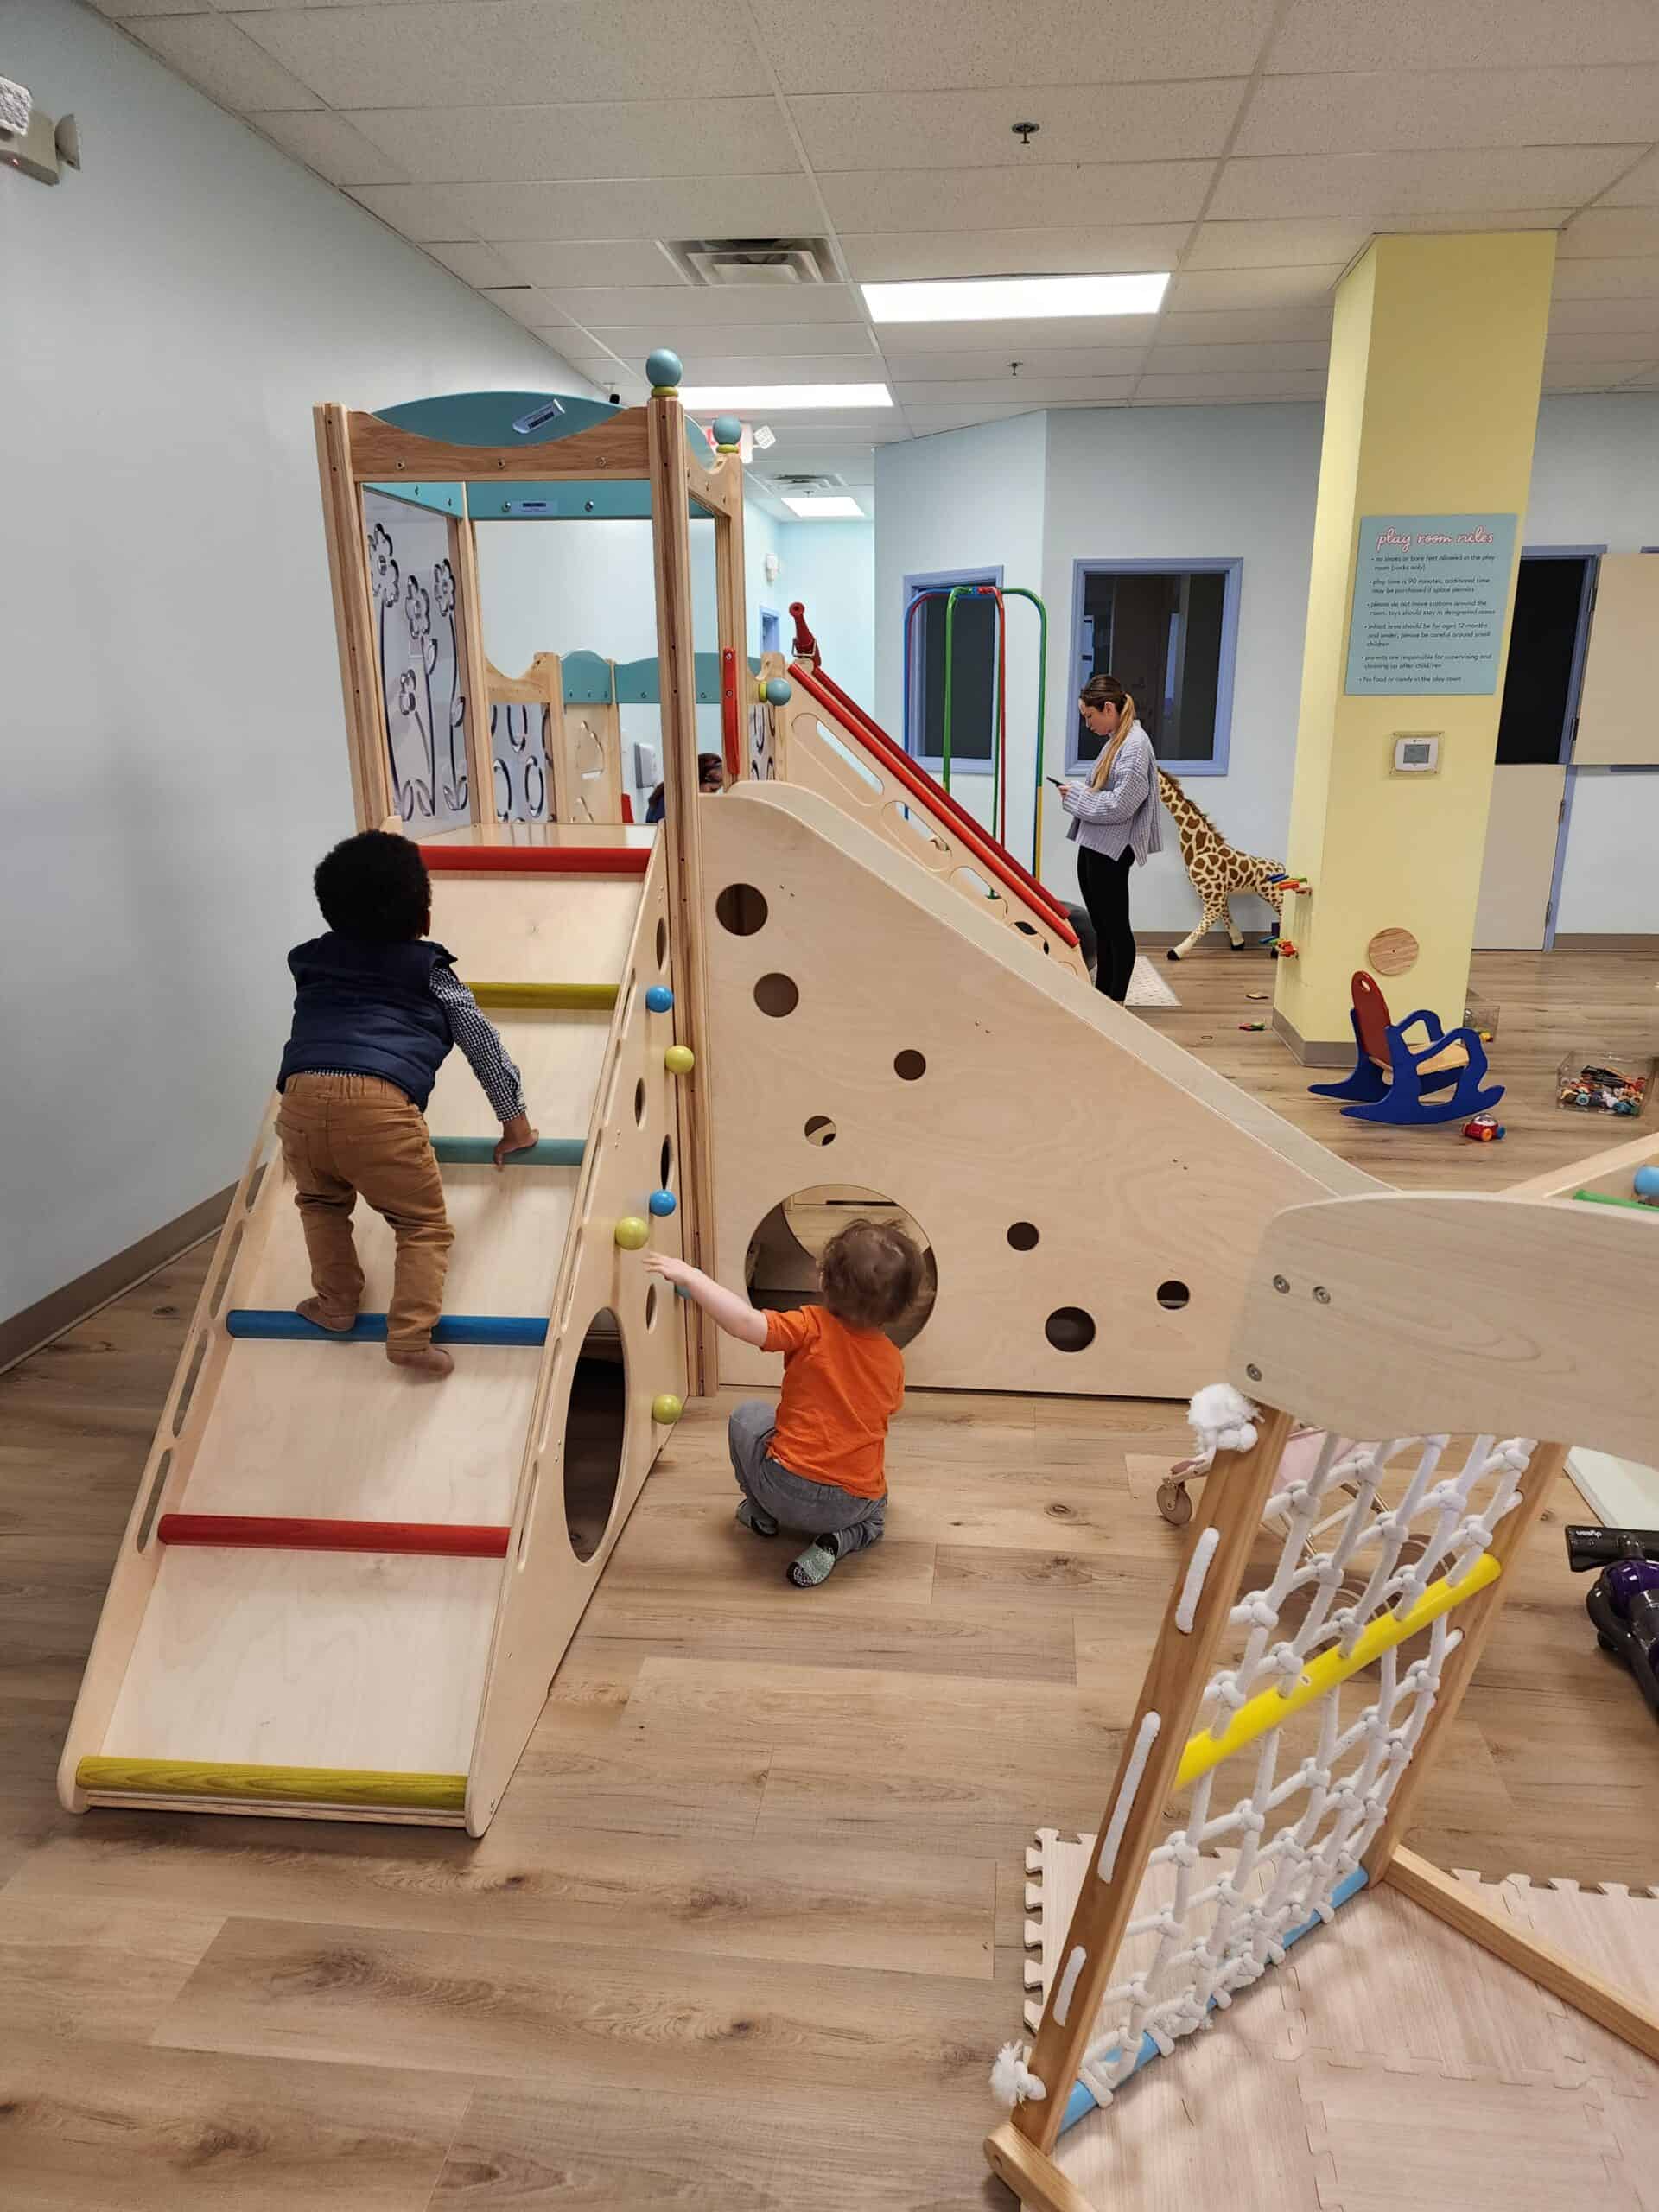 Children actively climbing and playing on a multi-level wooden play structure at Bumble Brews indoor playground in Raleigh, NC, reflecting a safe and engaging environment for kids to explore and have fun